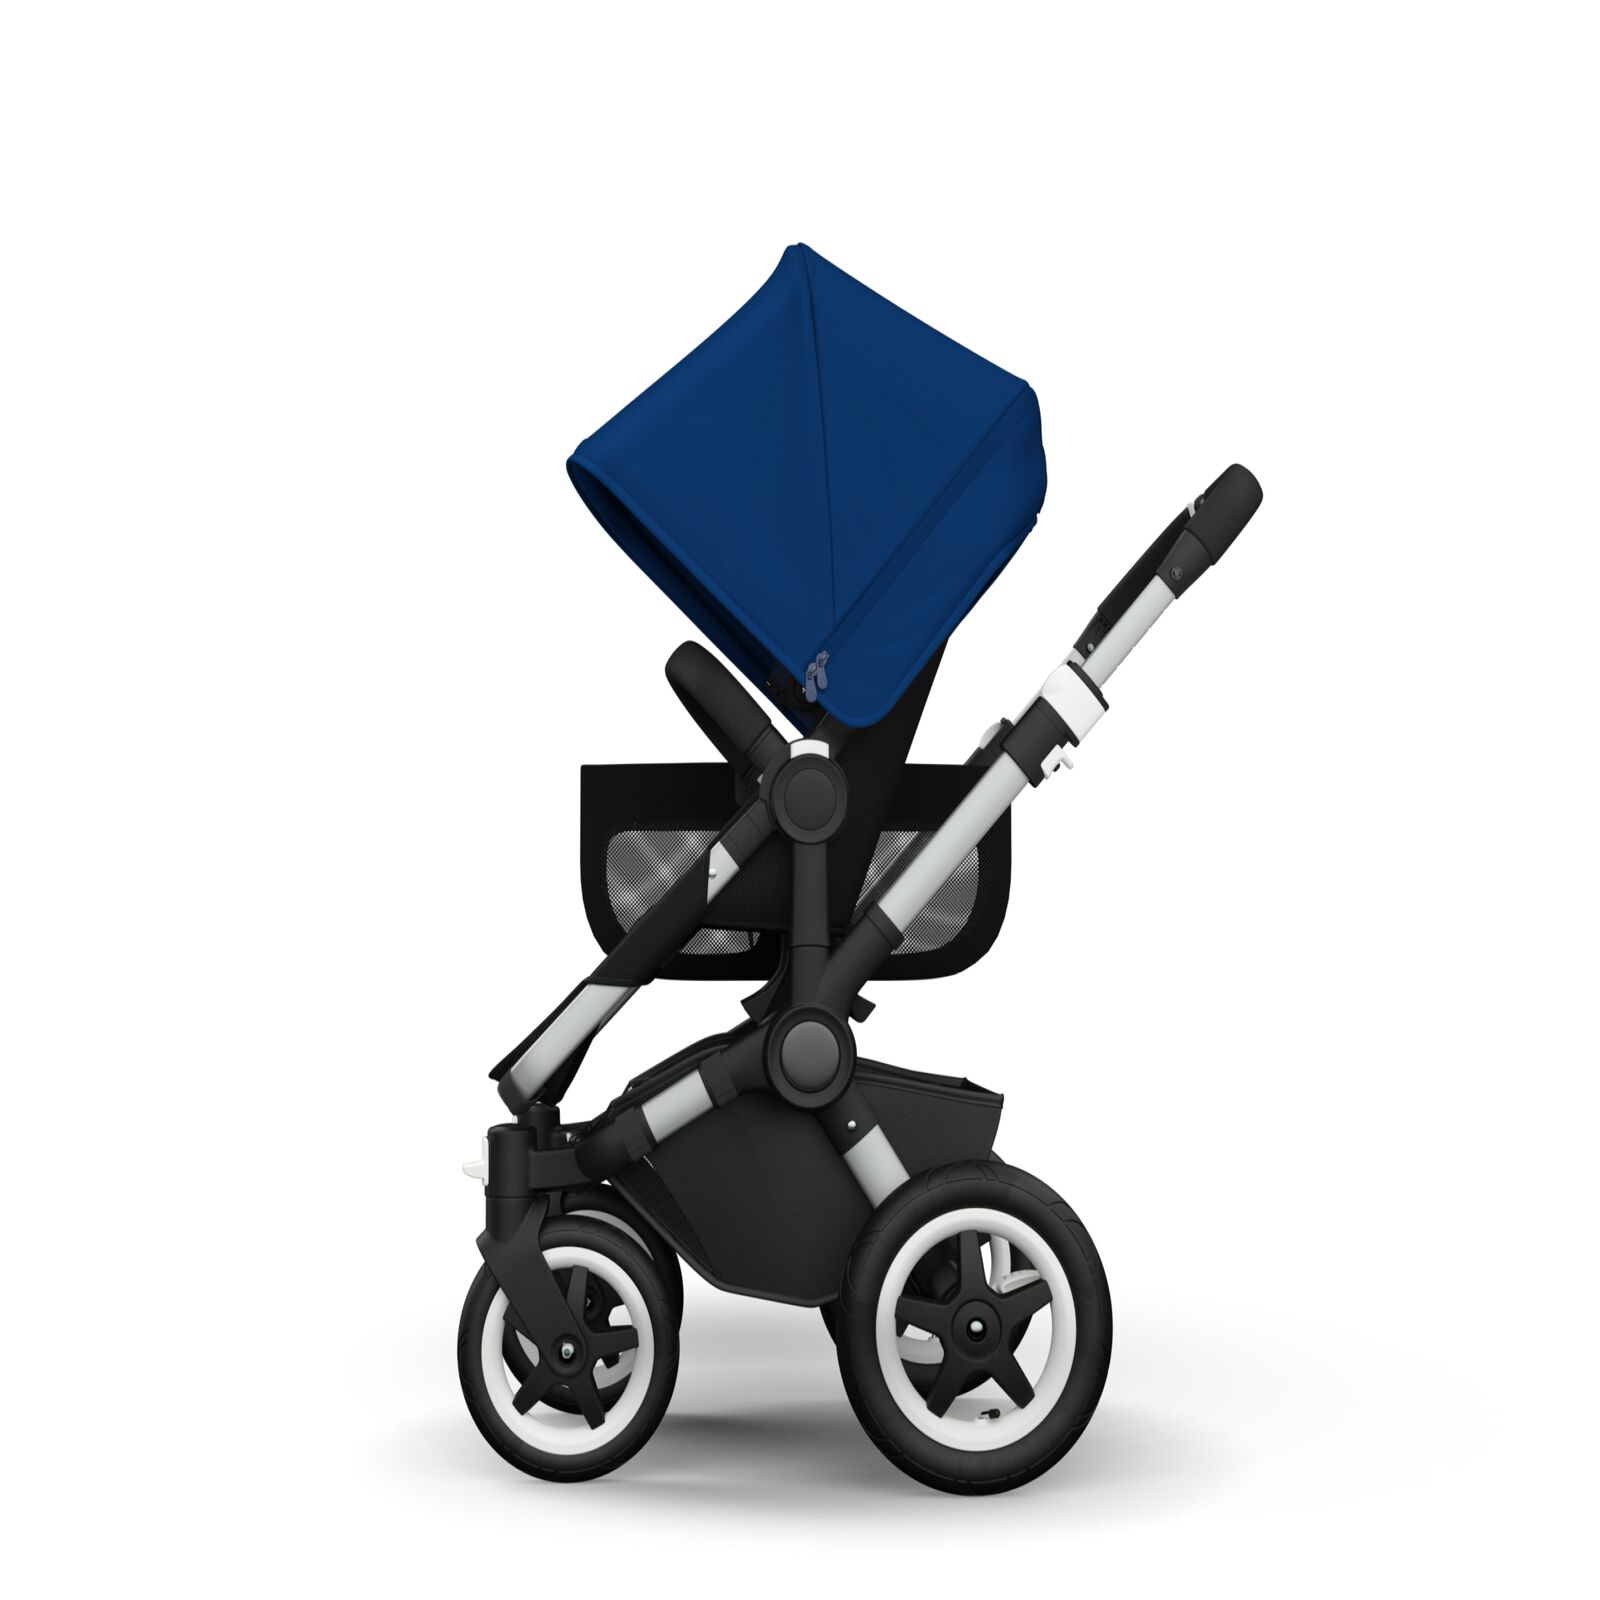 Bugaboo Donkey sun canopy (non-extendable) - View 7